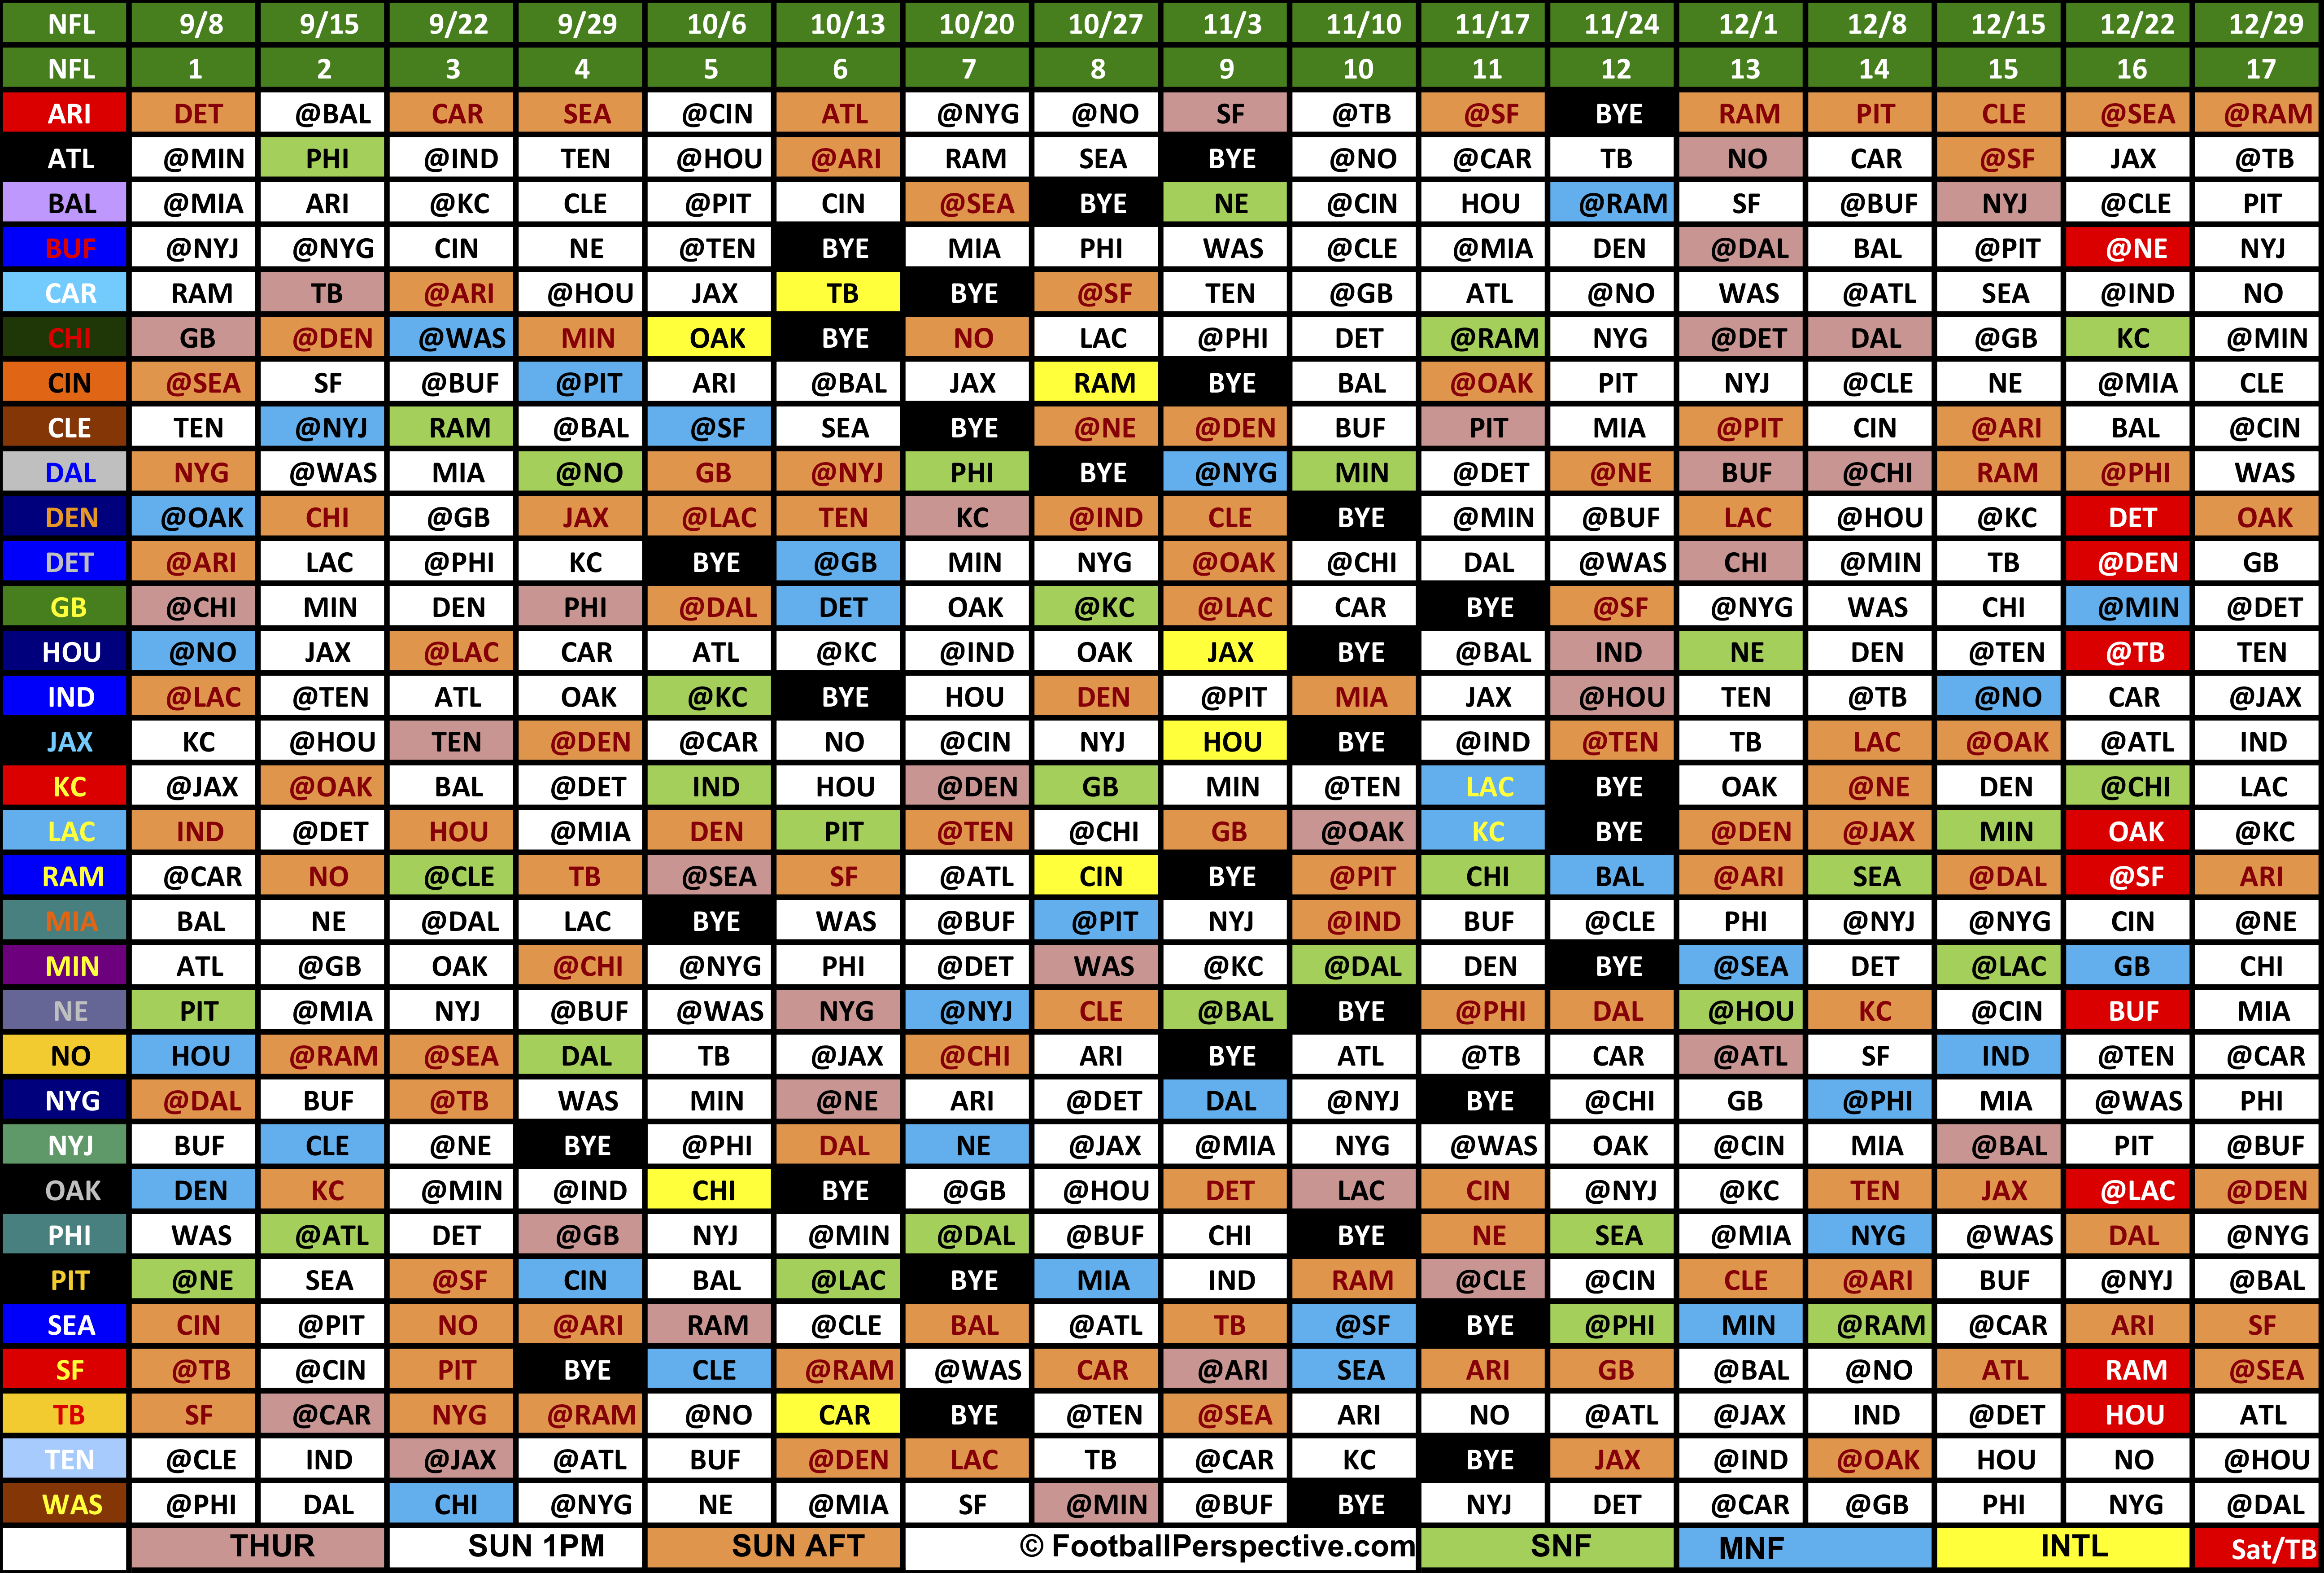 NFL Network on X: The 2019 NFL schedule is out! 